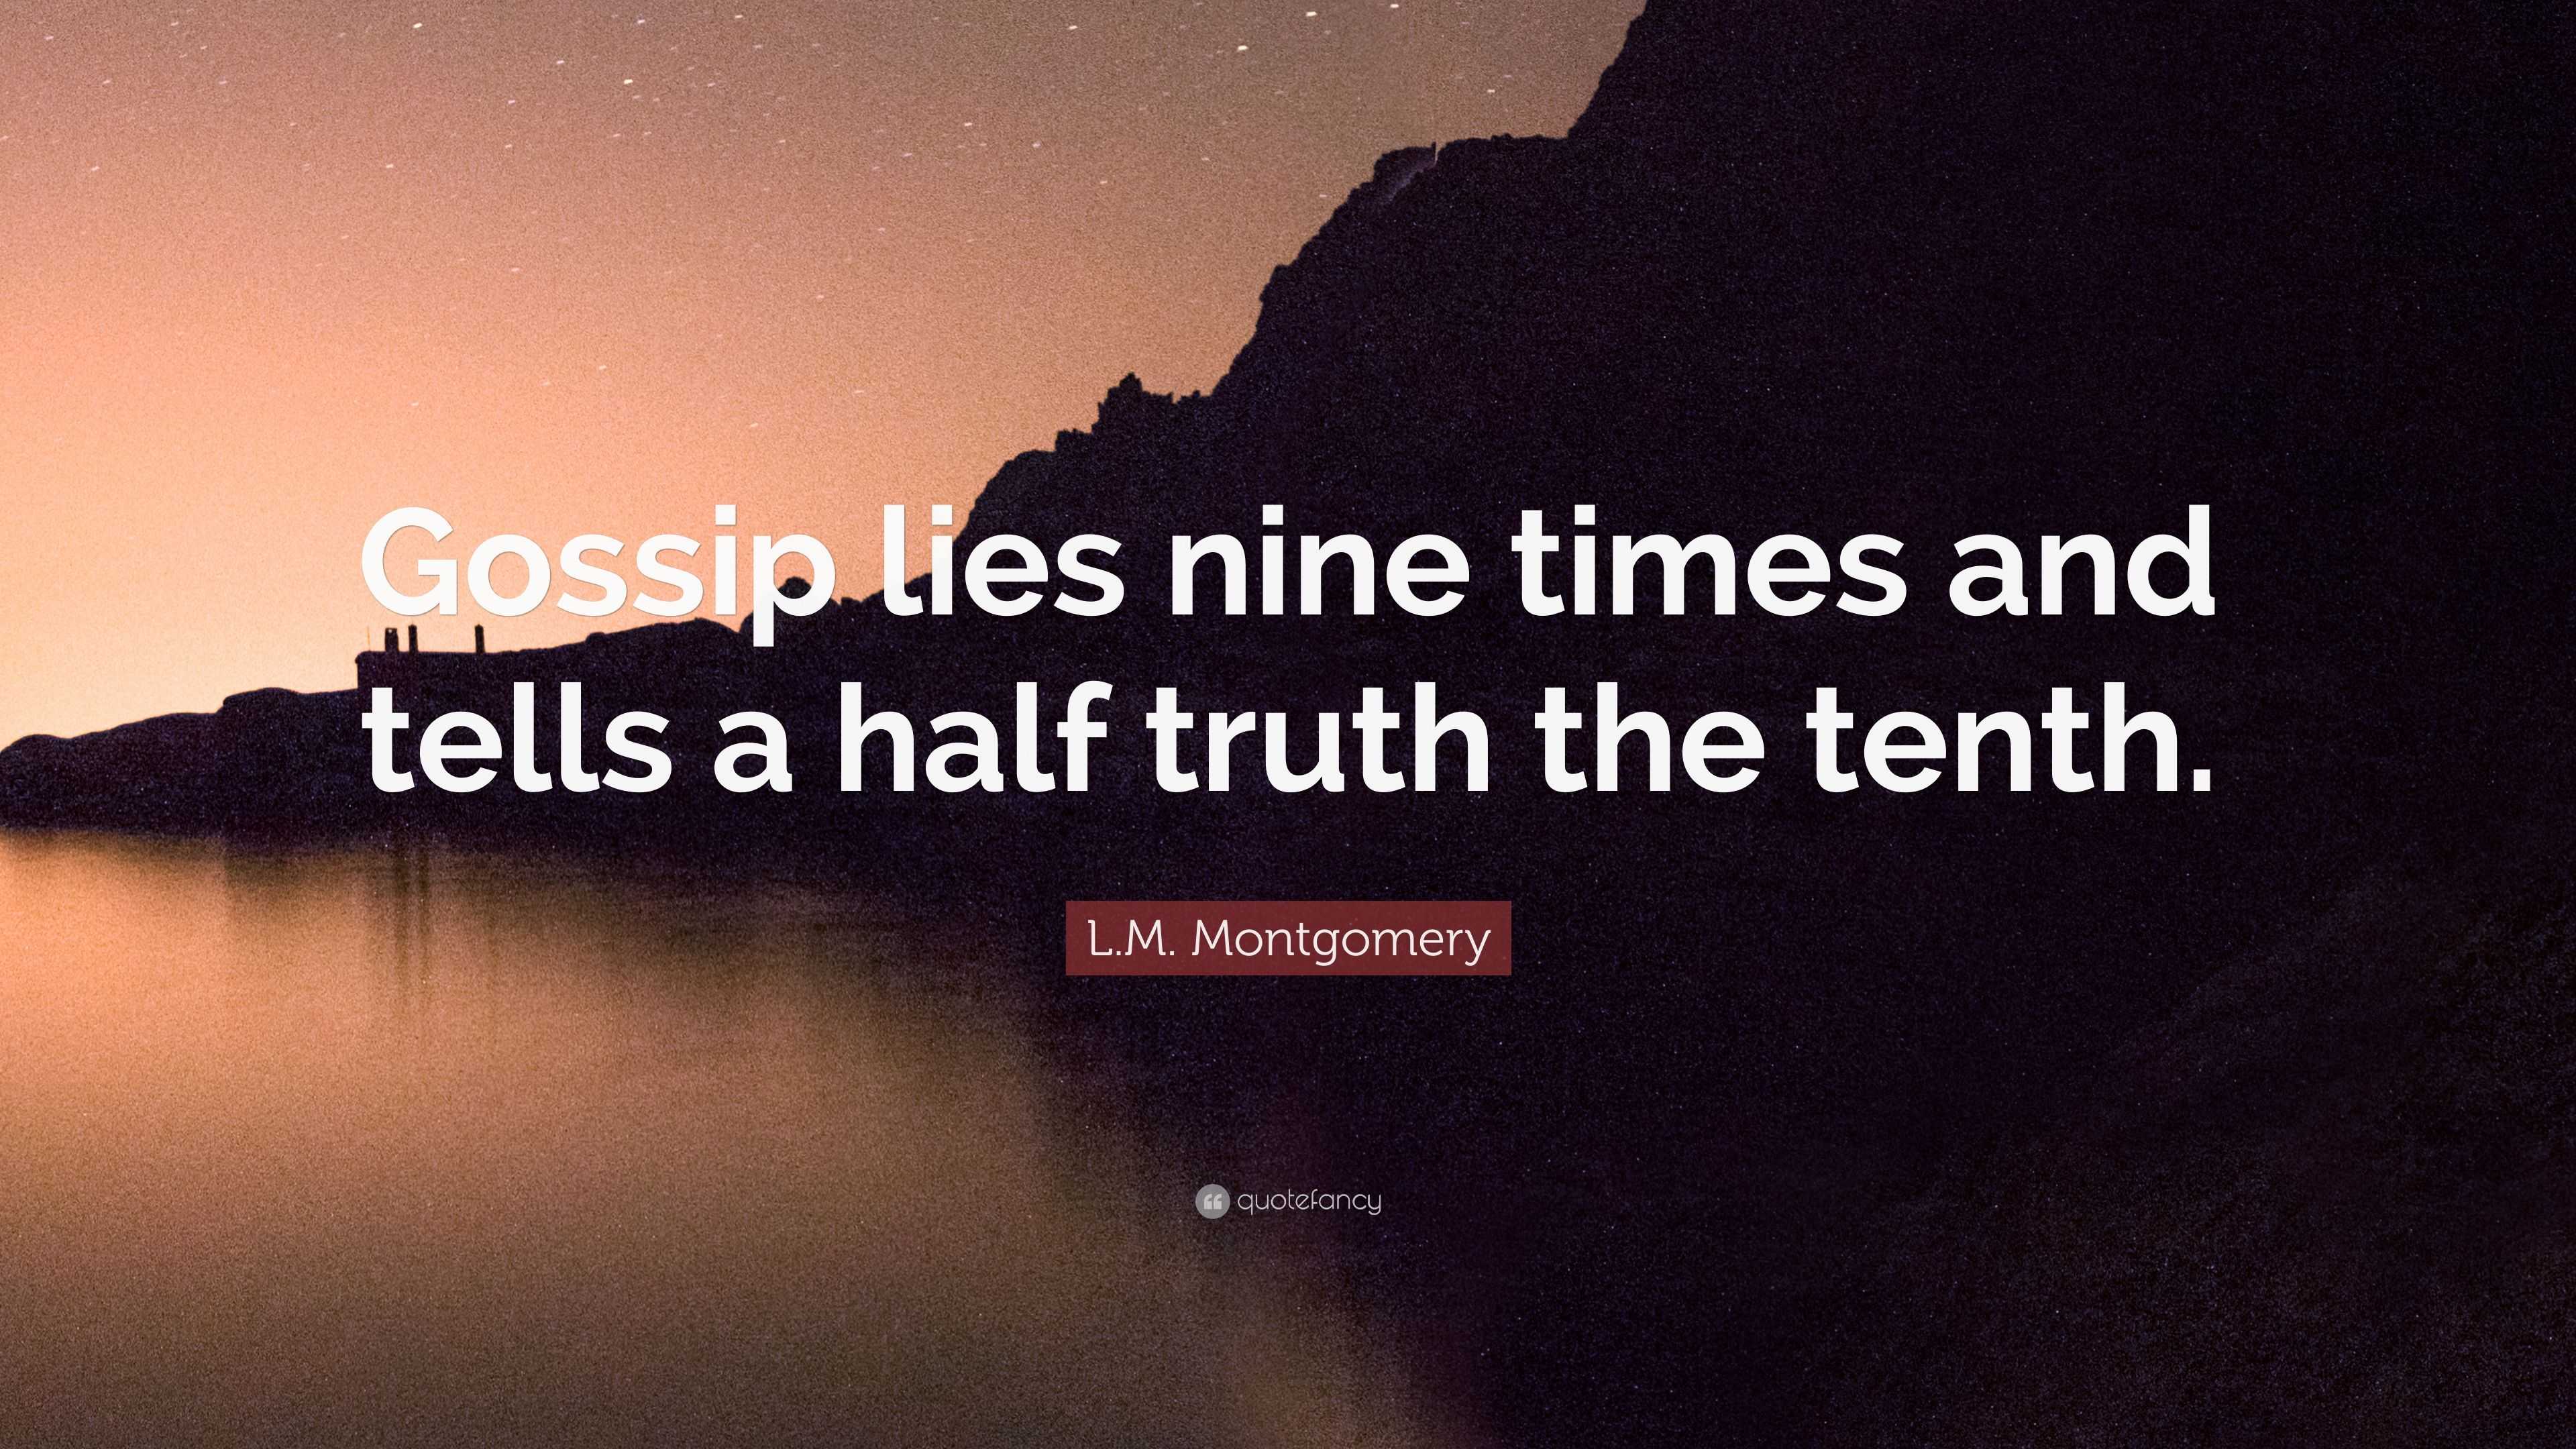 quotes about gossip and lies